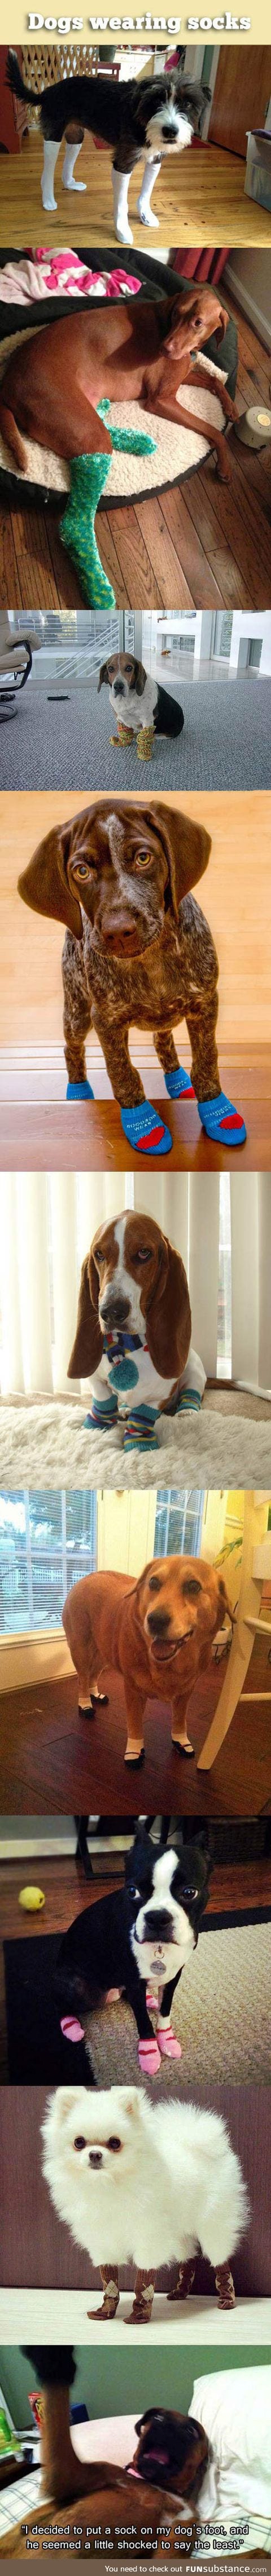 Dogs wearing socks compilation